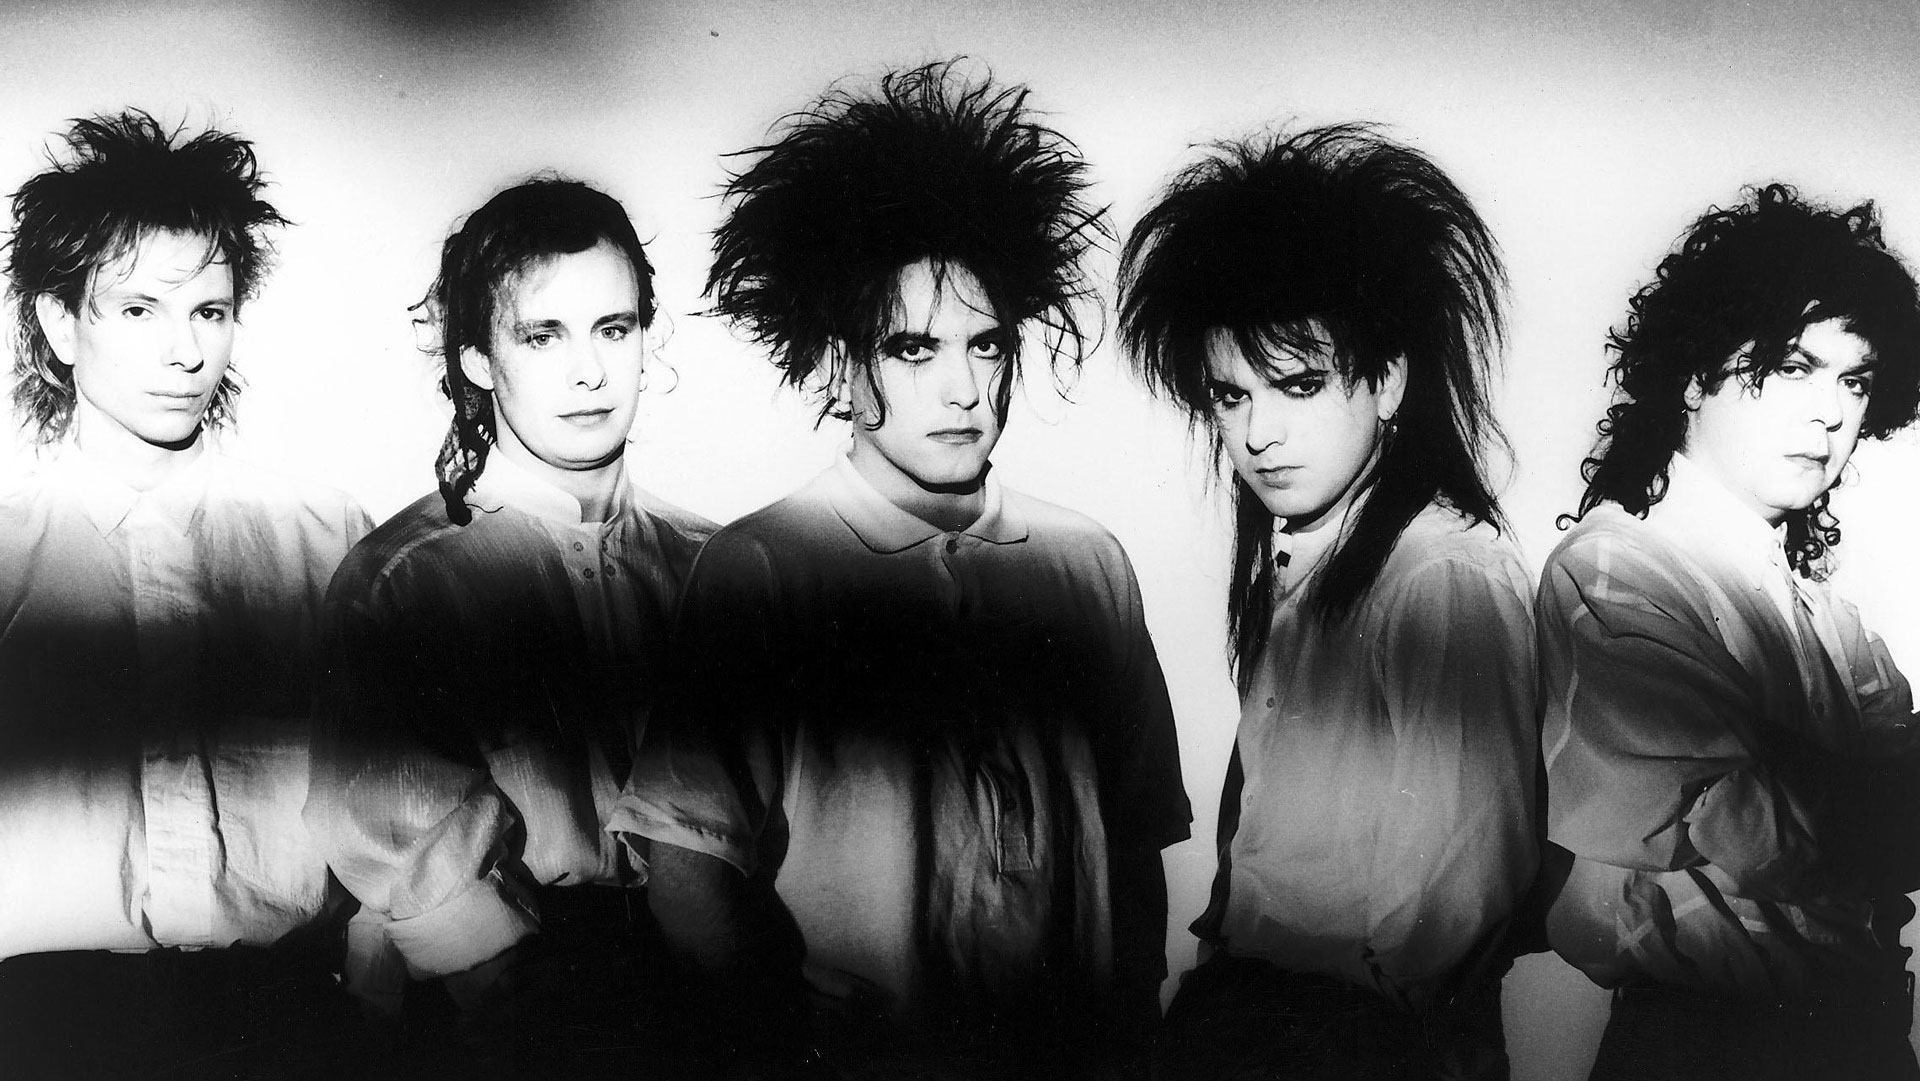 A black and white picture of The Cure from 1986 with Lol Tolhurst on the right